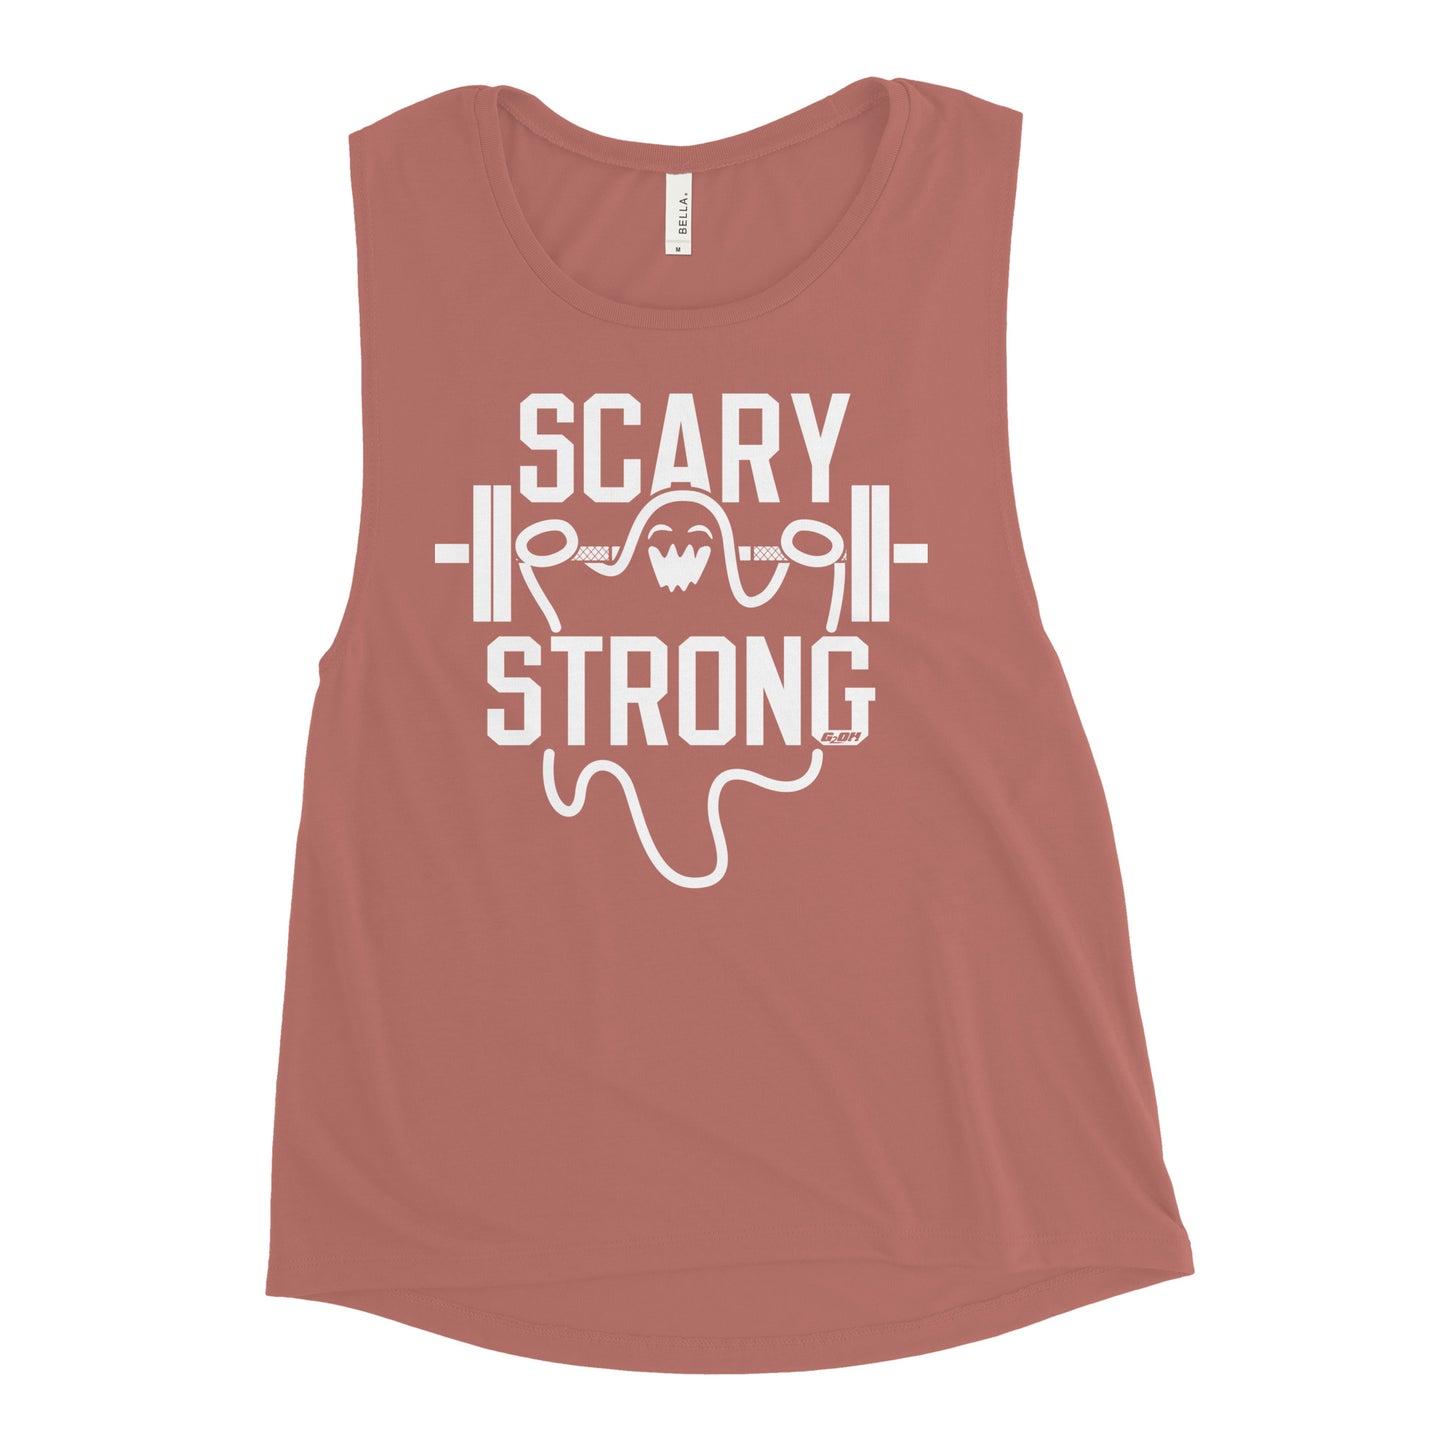 Scary Strong Women's Muscle Tank